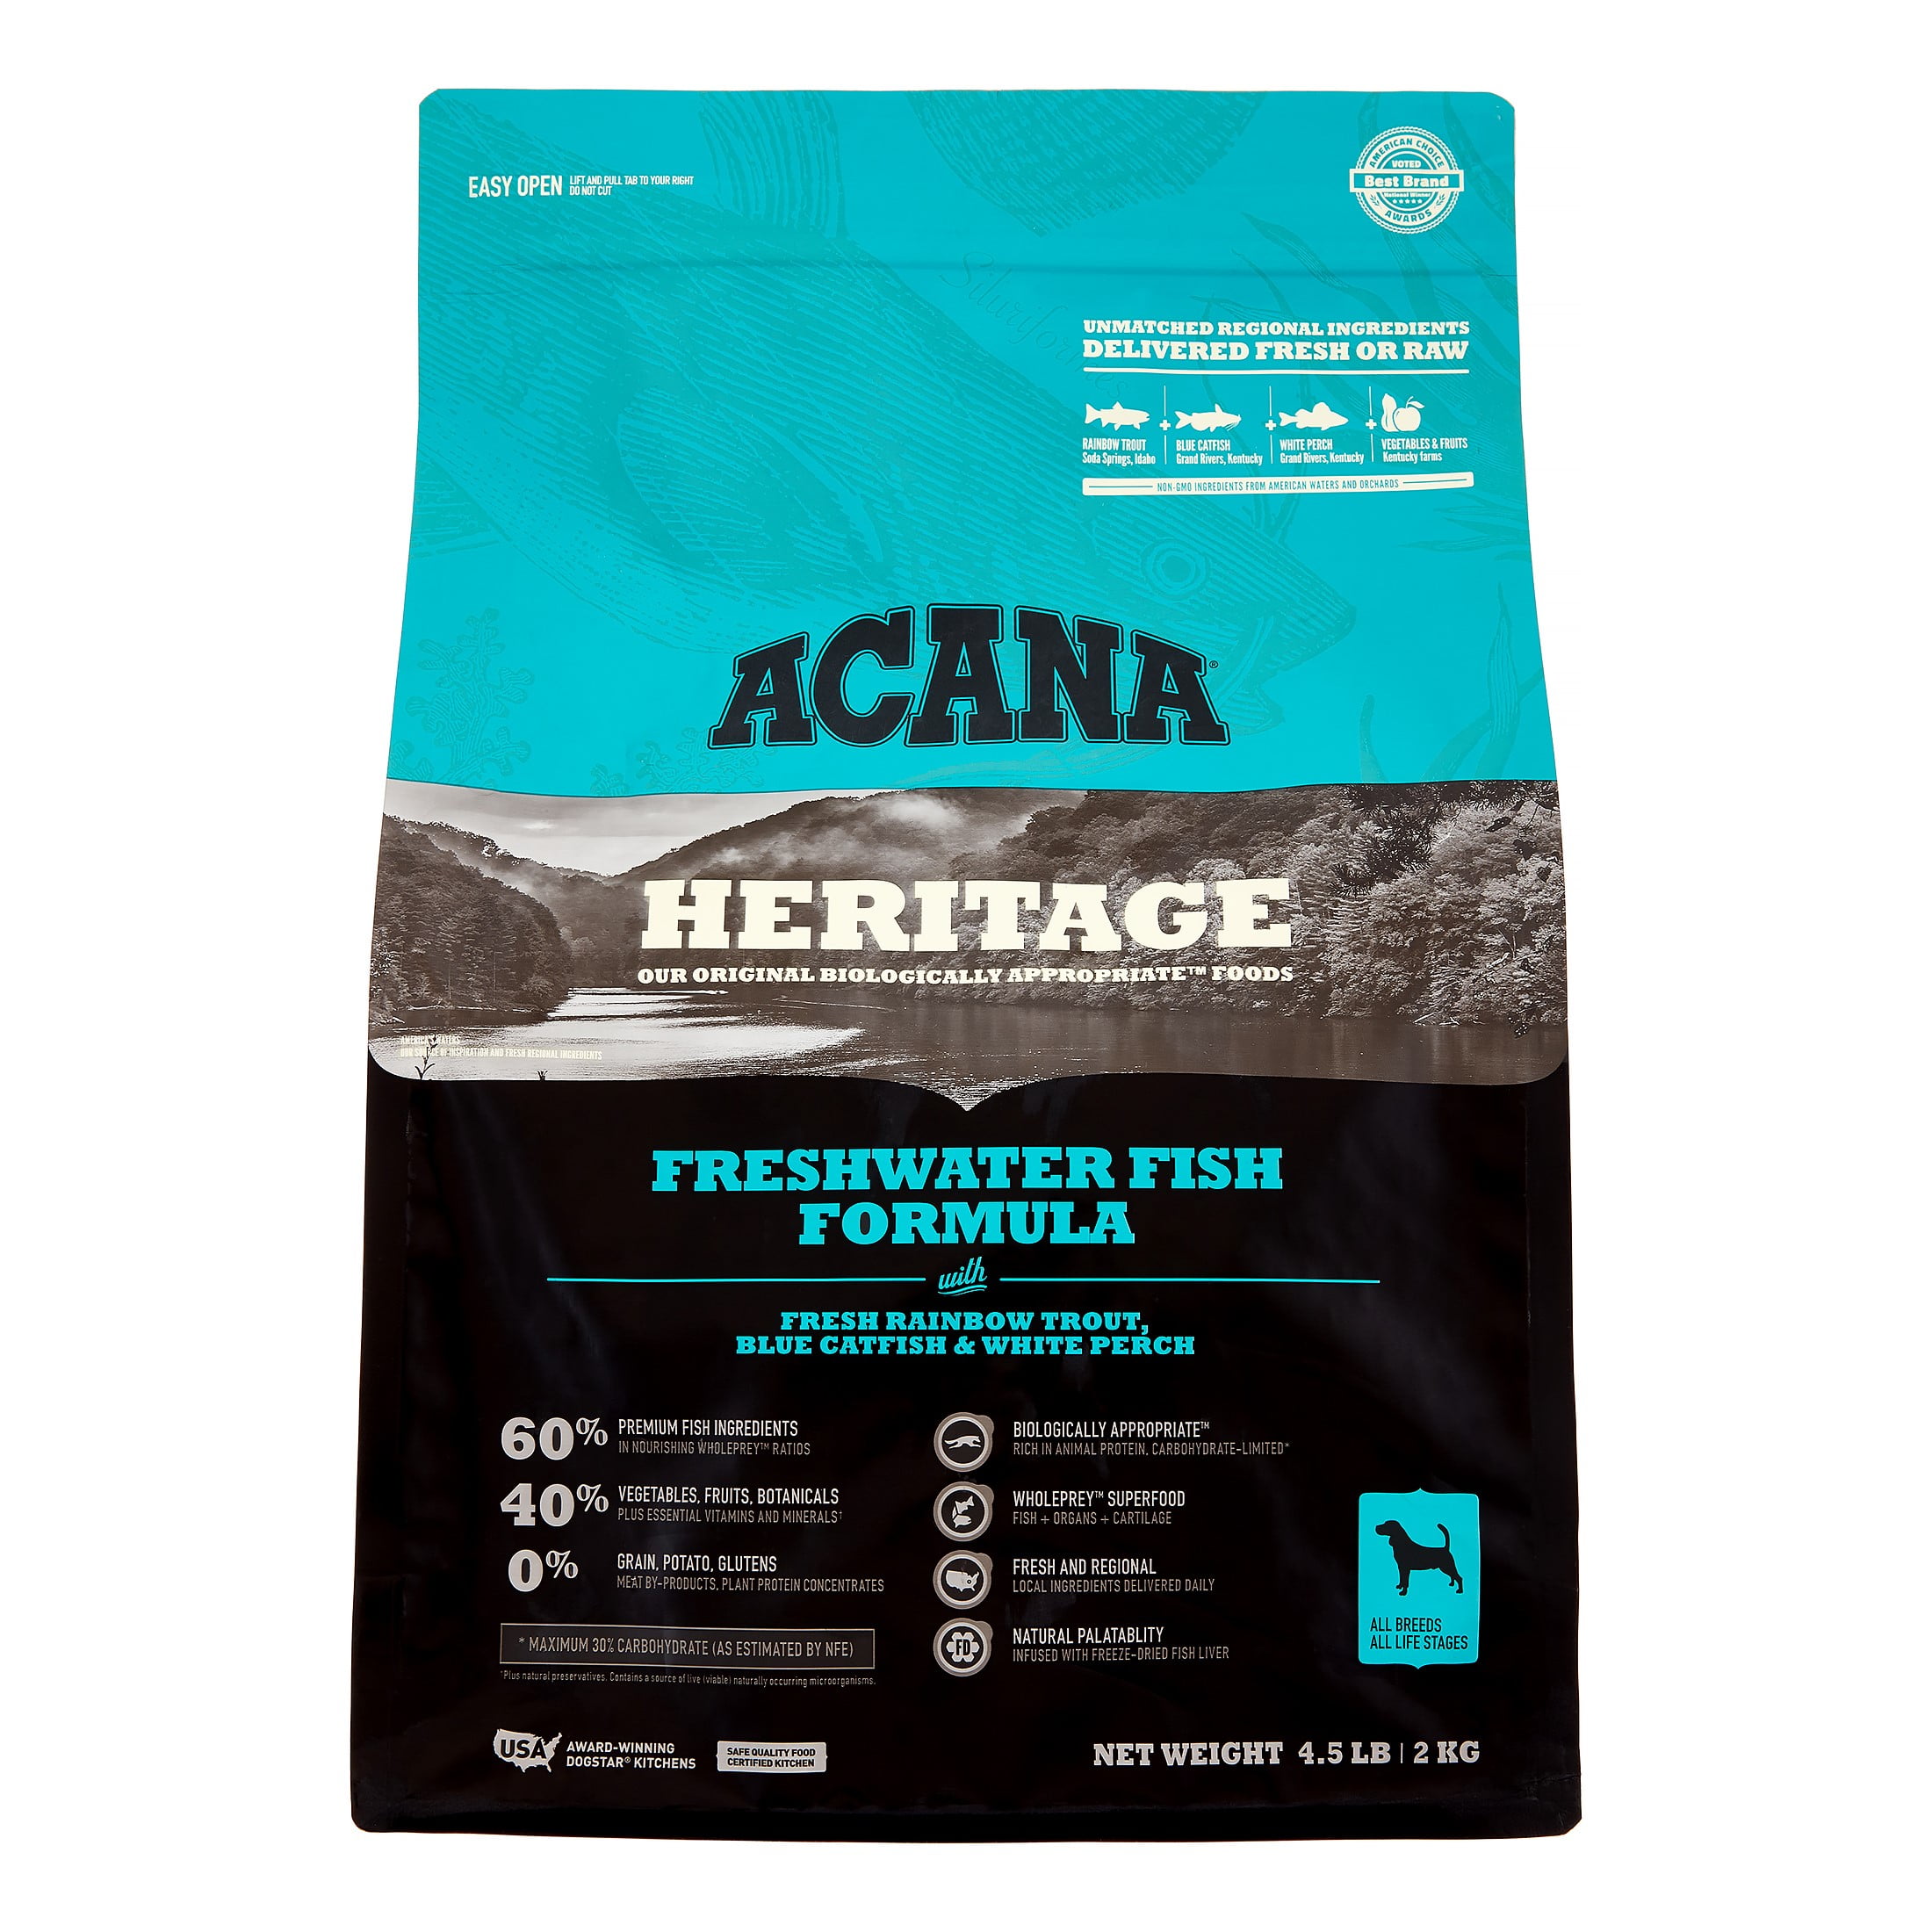 Acana Heritage Grain-Free Freshwater Fish Formula With Trout, Catfish,  Perch & Greens Dry Dog Food, 25 lb 